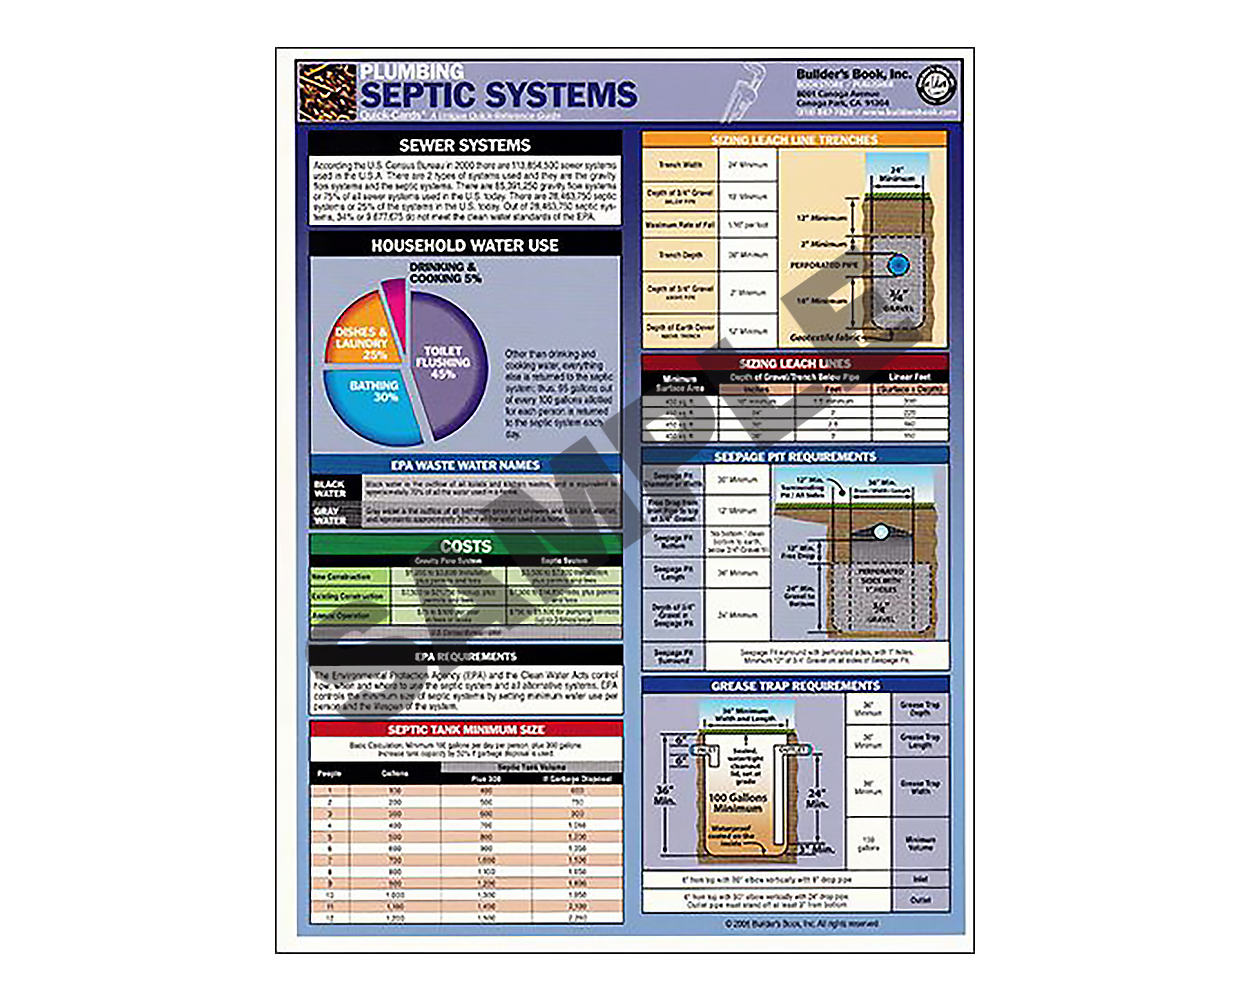 Plumbing Septic Systems